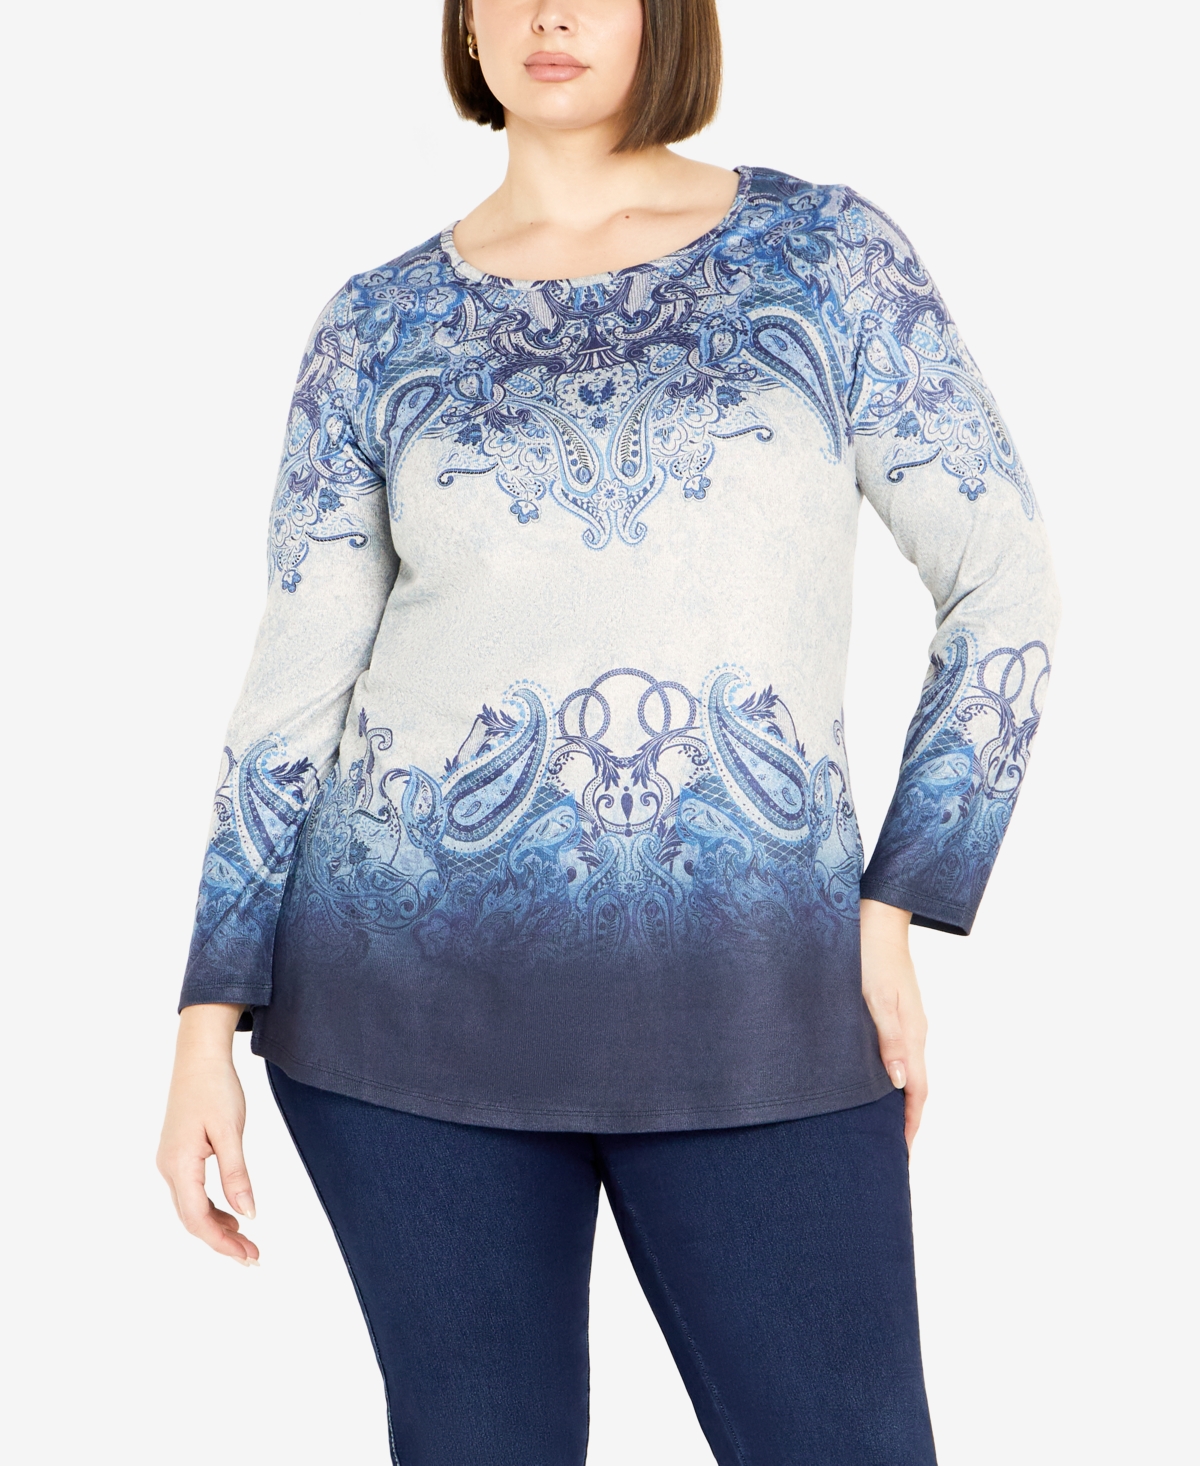 Avenue Plus Size Callie Placement Long Sleeve Top In Blue Paisley Ornate